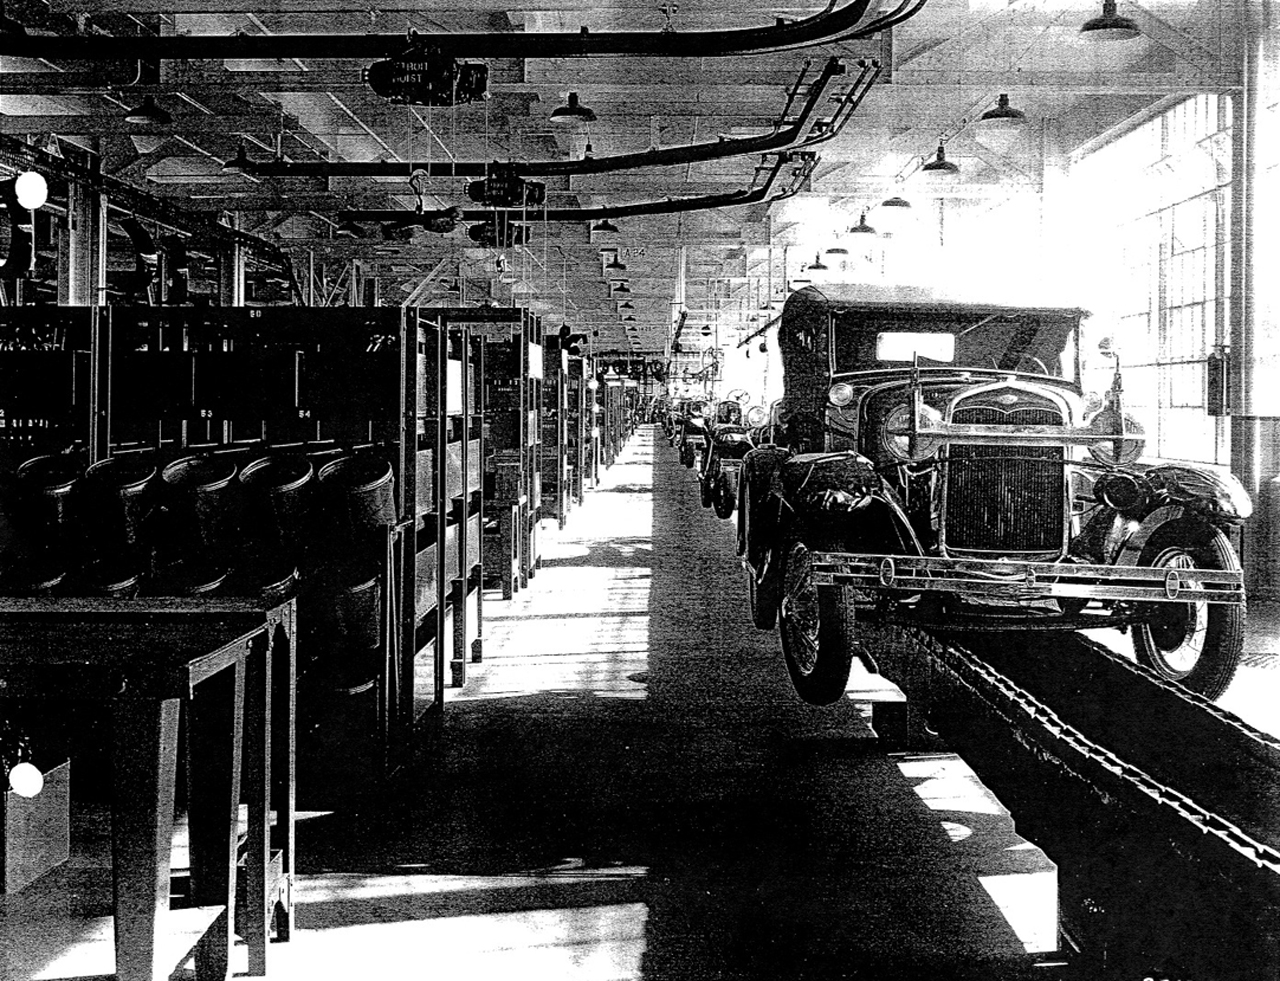 Assembly line 1920 henry ford